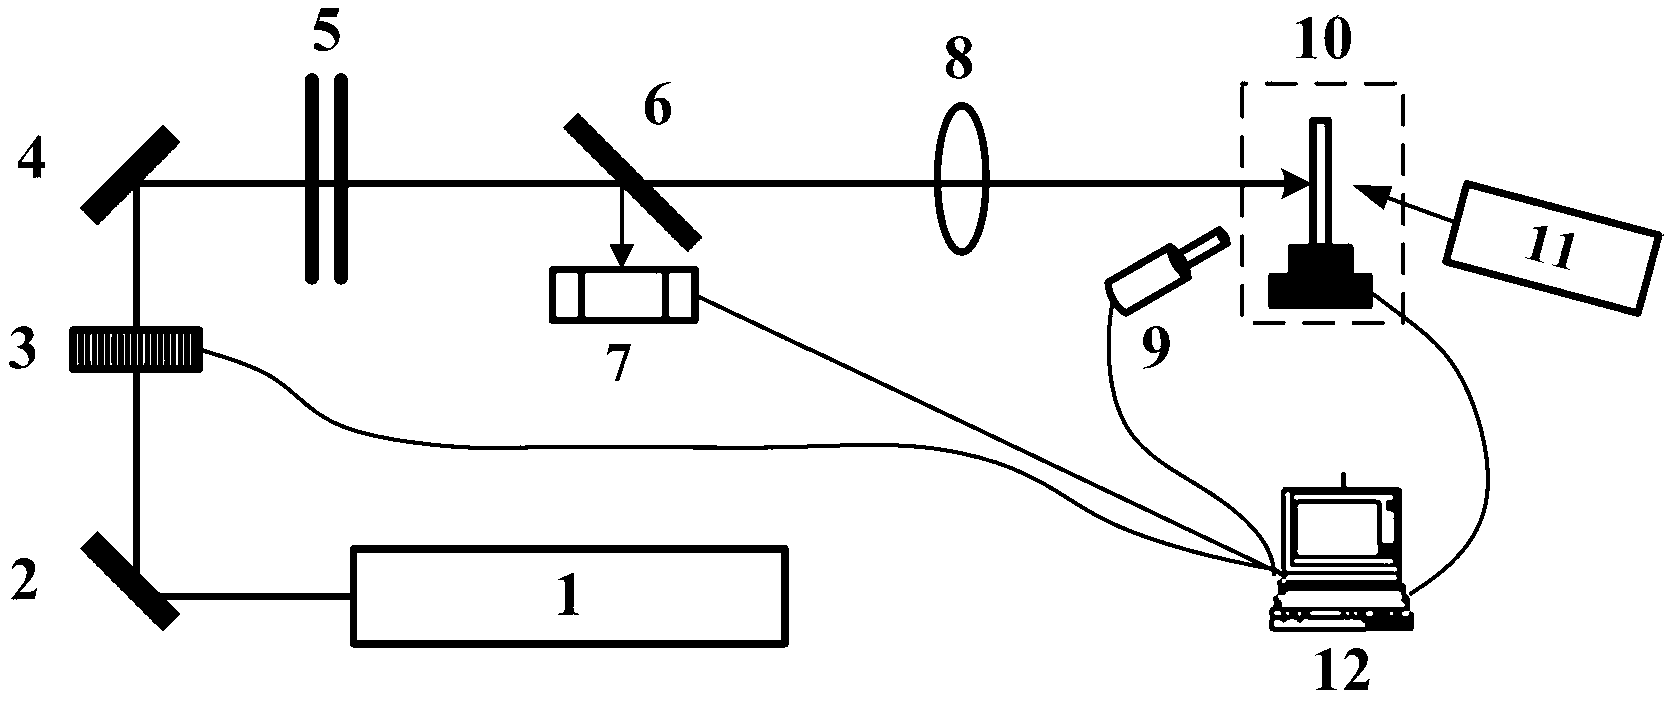 Repair method for surface-damaged growth point of melted quartz element